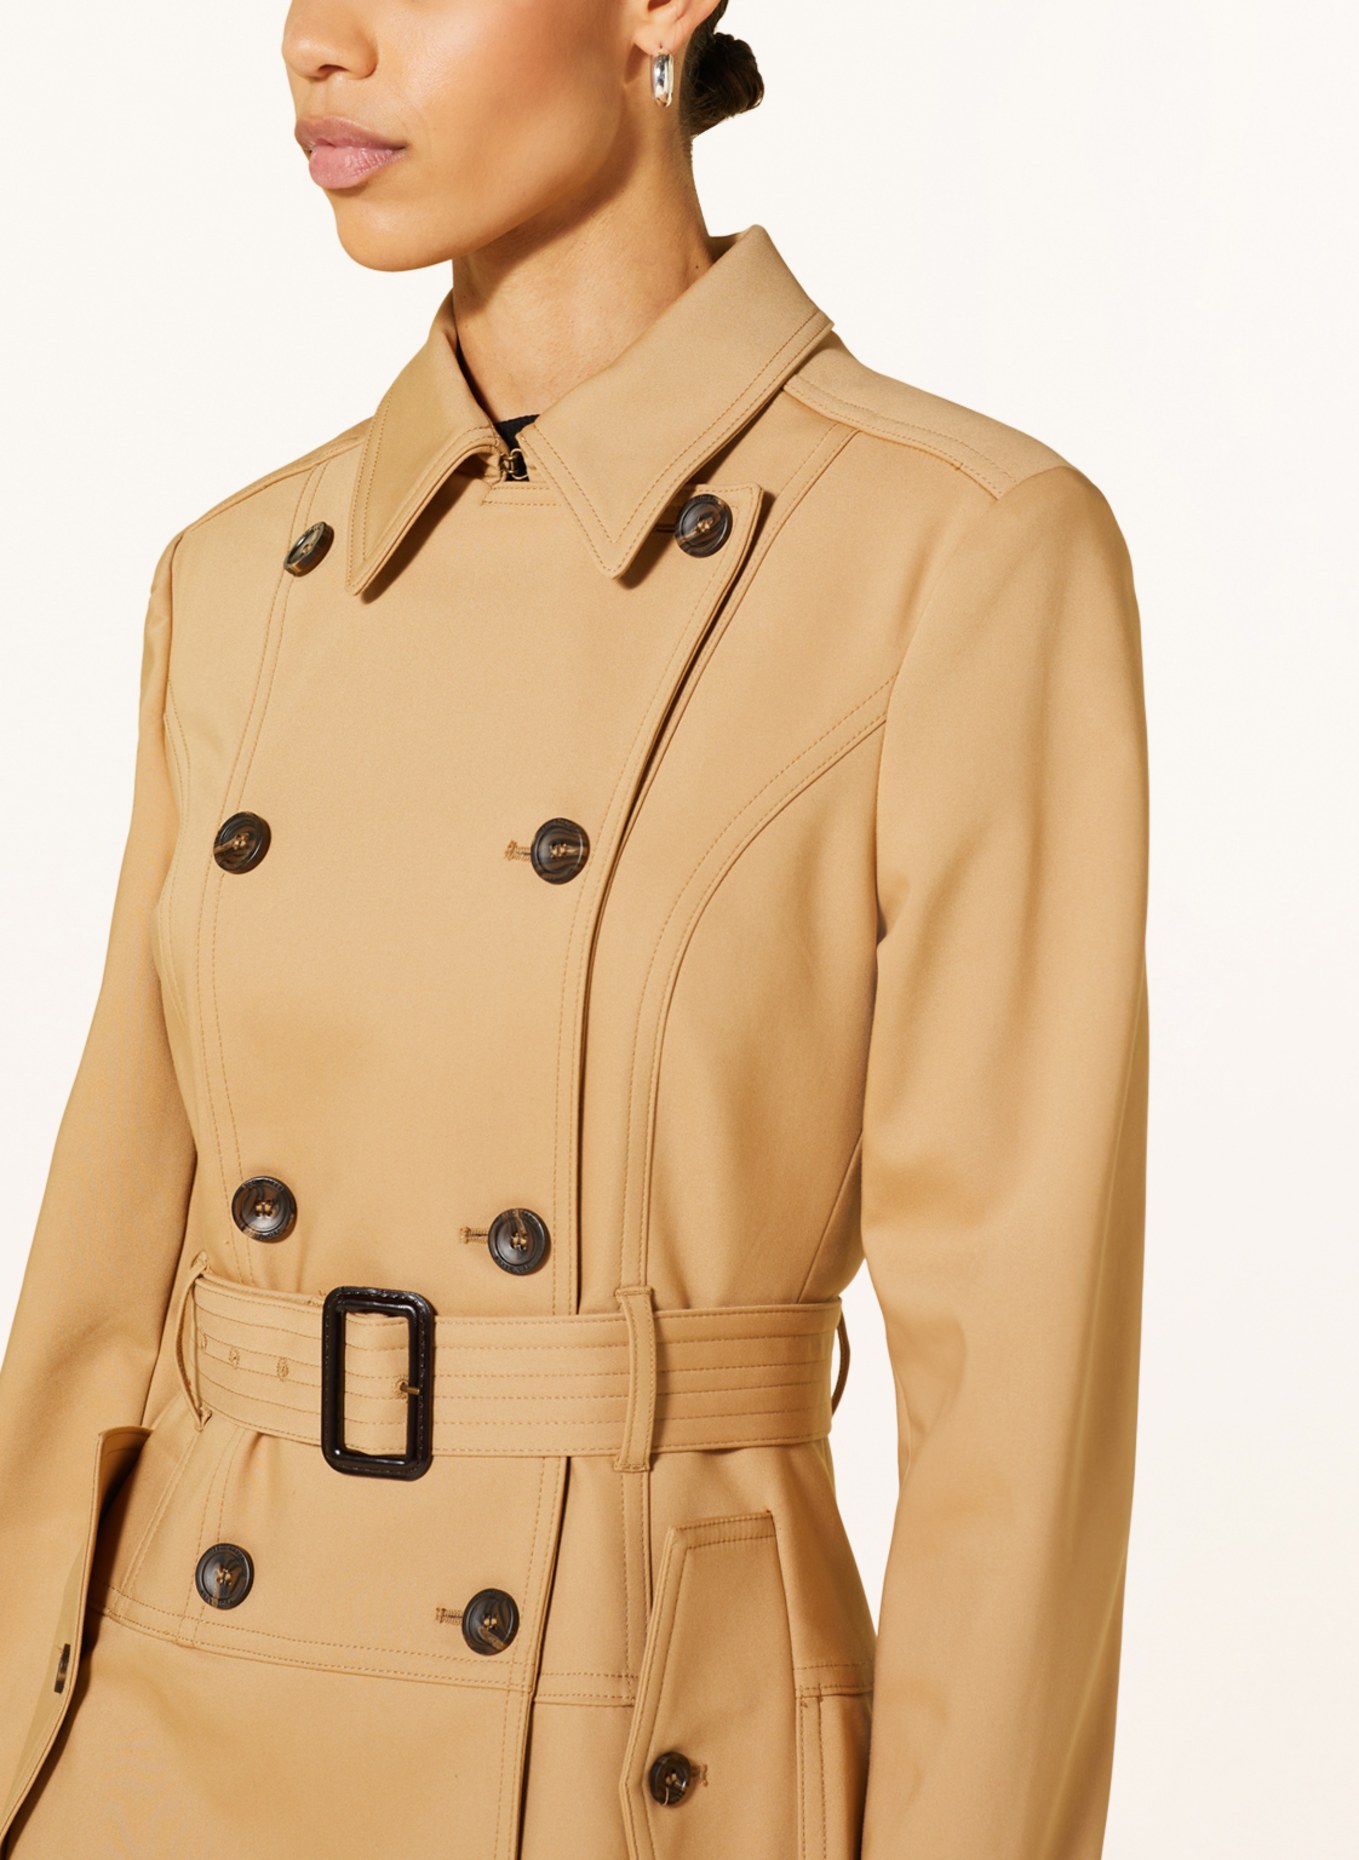 Buy Ted Baker Rose Midi Wool Wrap Coat With Shoulder Panels from